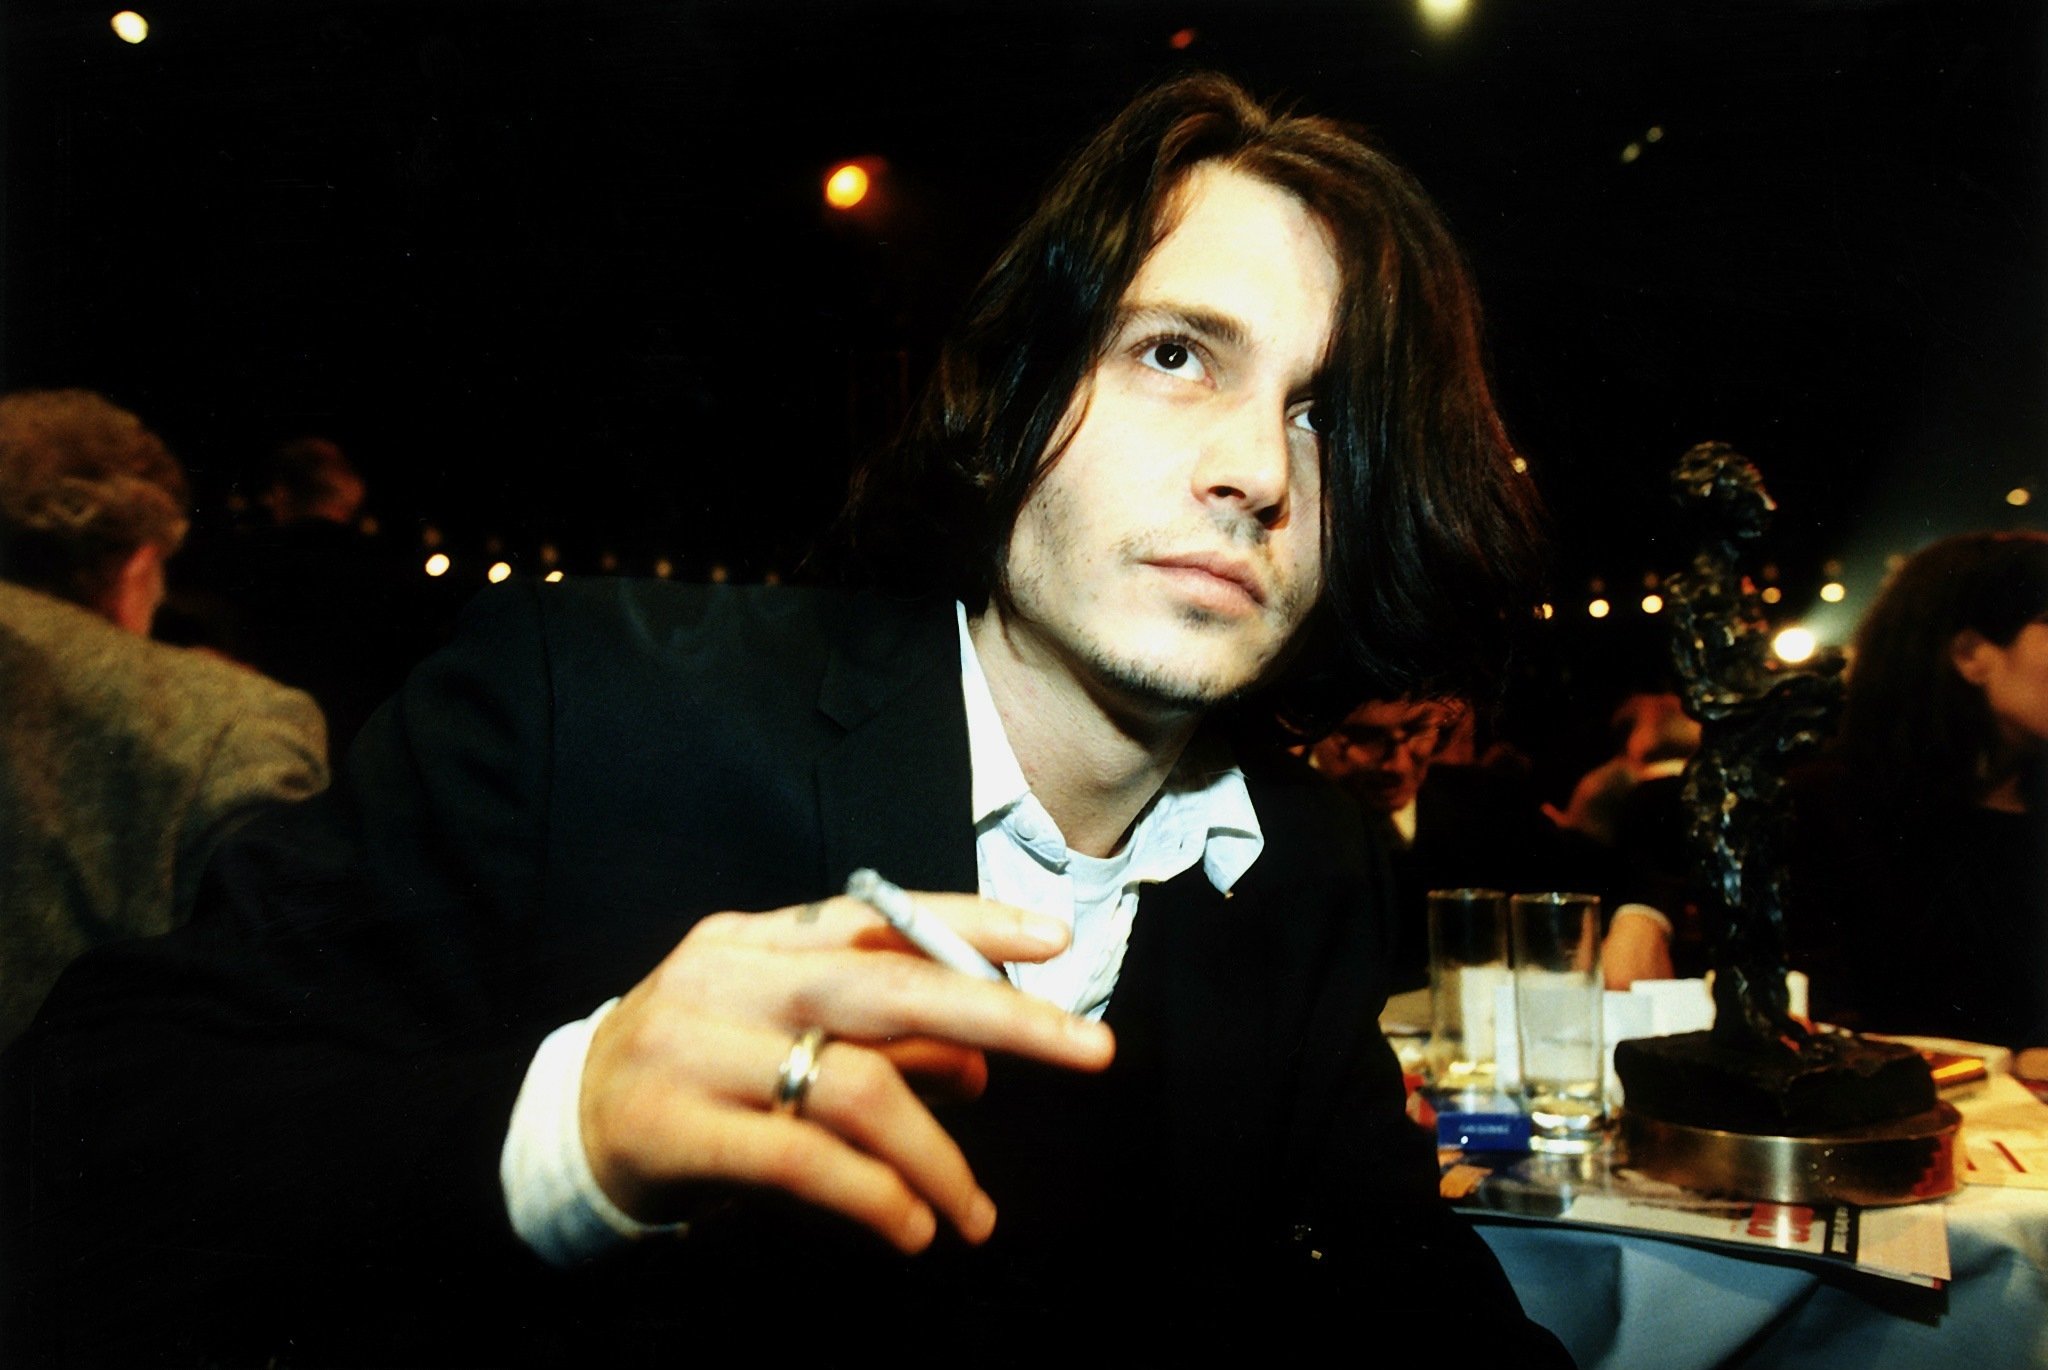 Johnny Depp holds a cigarette in the '90s, when he had several encounters with Jennifer Love Hewitt